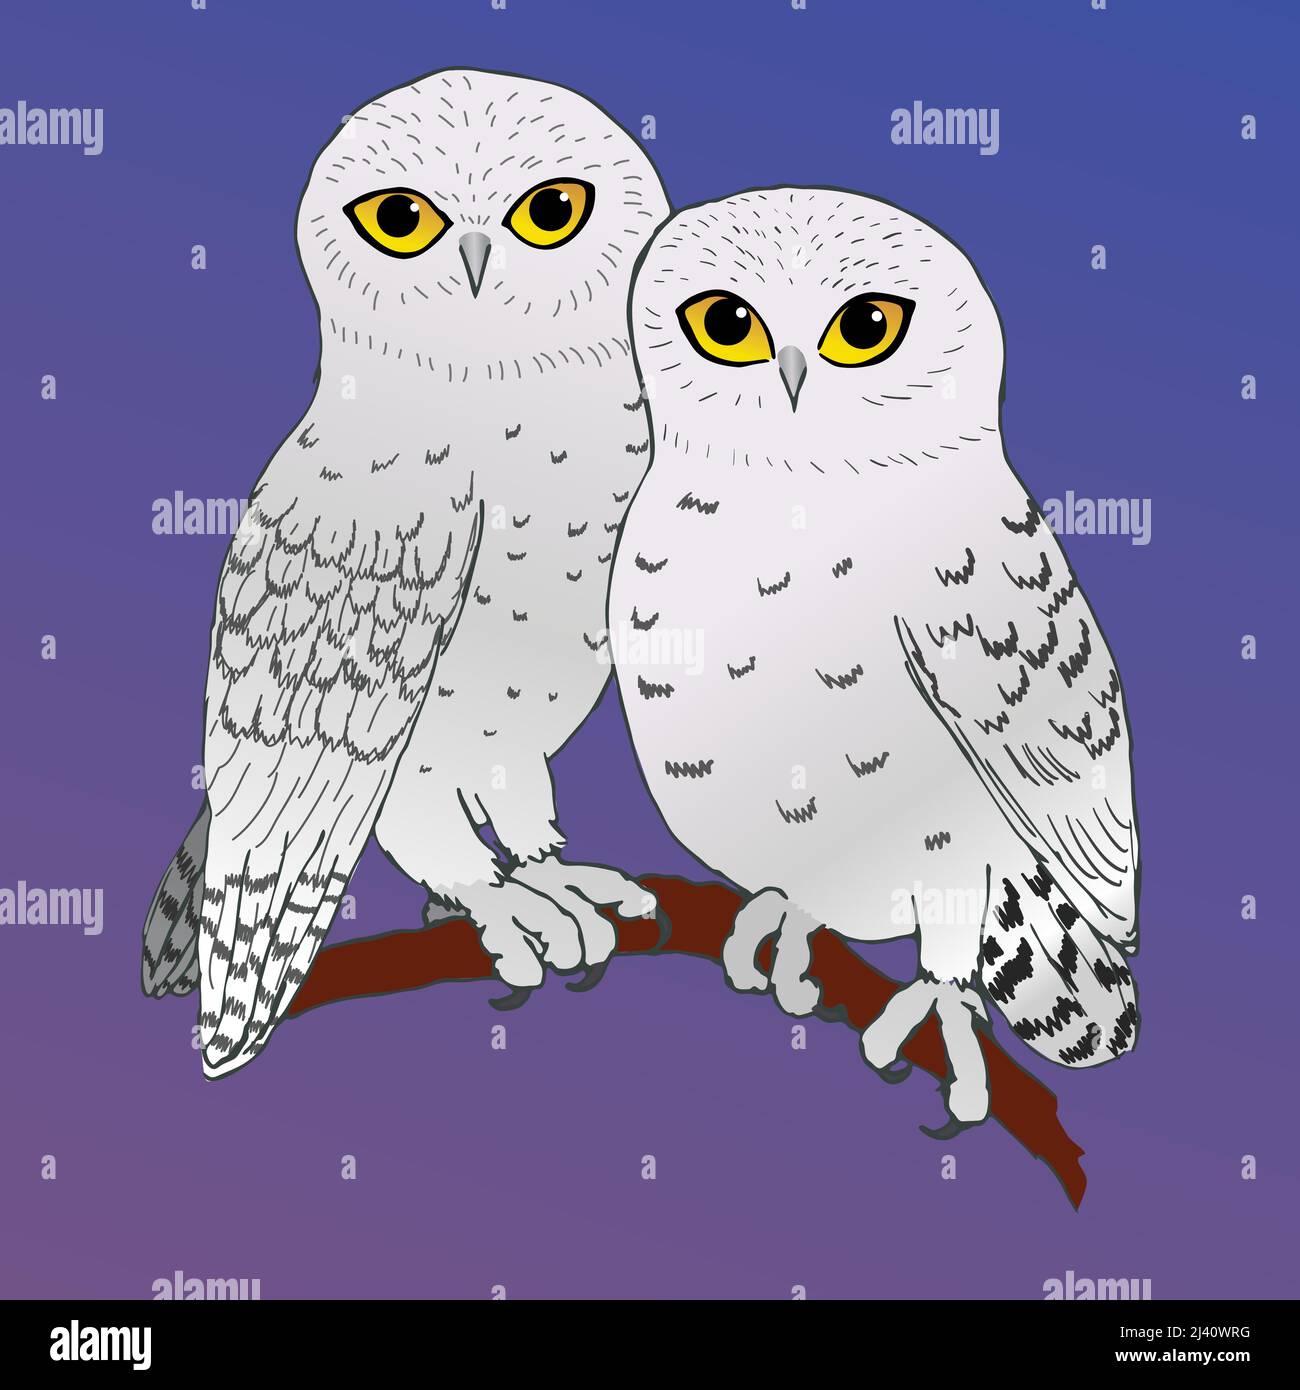 A vector illustration of two cute snowy owls sitting cozy close together. They are perched on a branch and the background is a purple and blue gradie Stock Vector